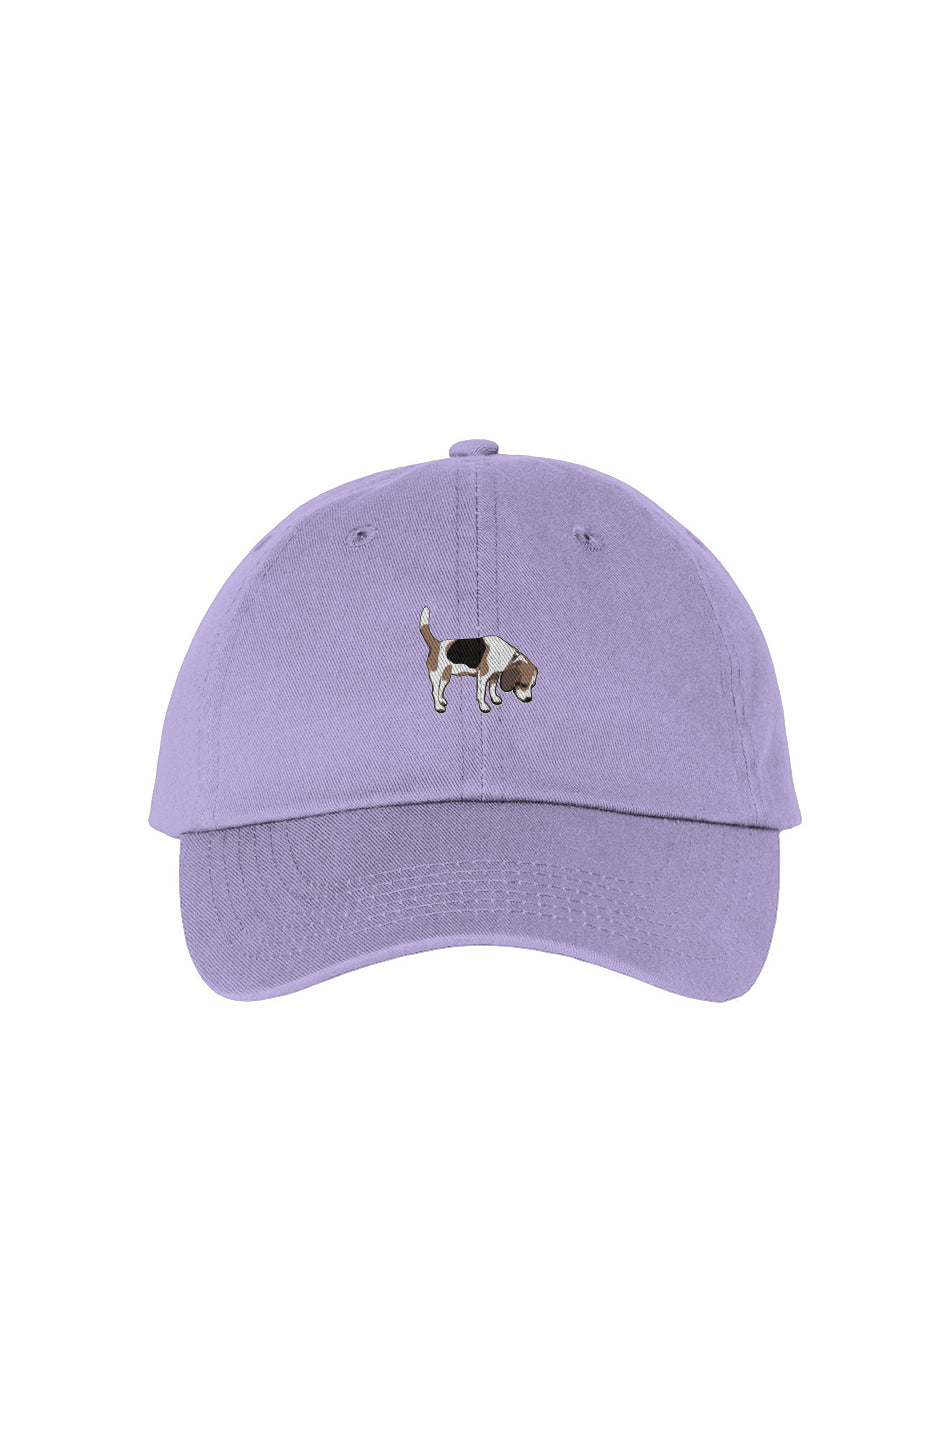 Embroidered Ball Cap - Beagle - Violet